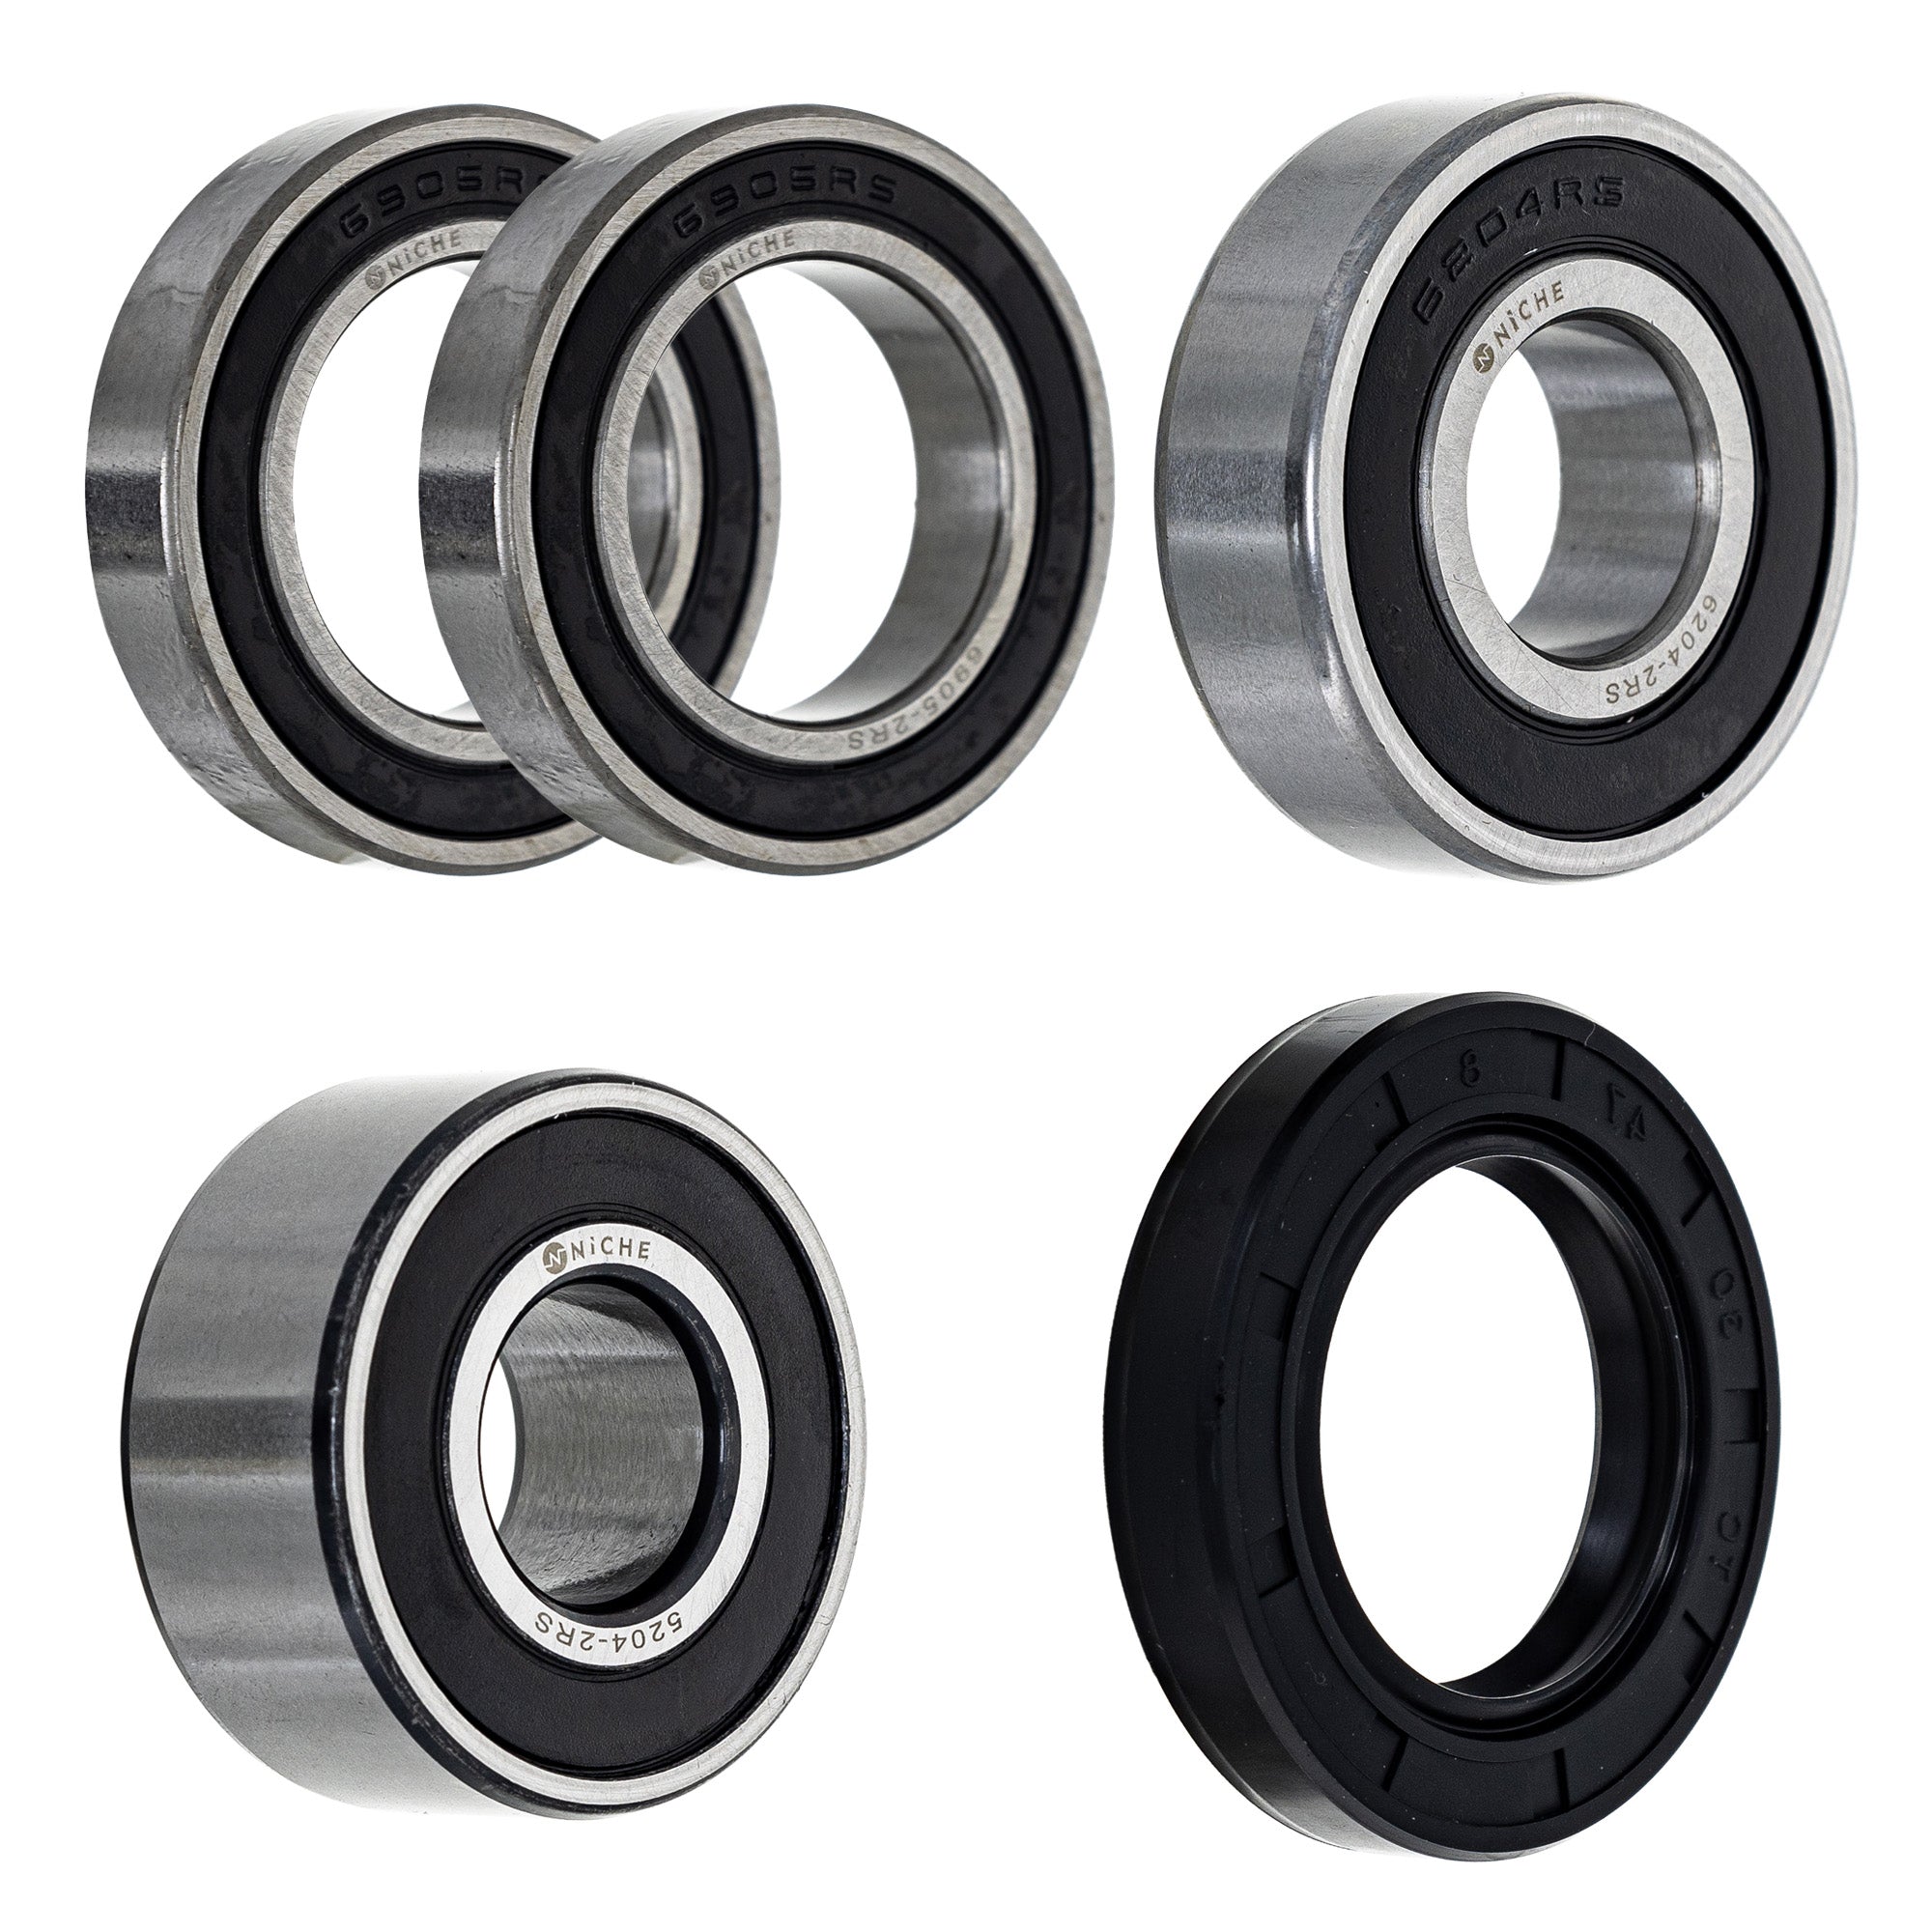 Wheel Bearing Seal Kit for zOTHER Ref No ST1300 CTX1300 NICHE MK1008890